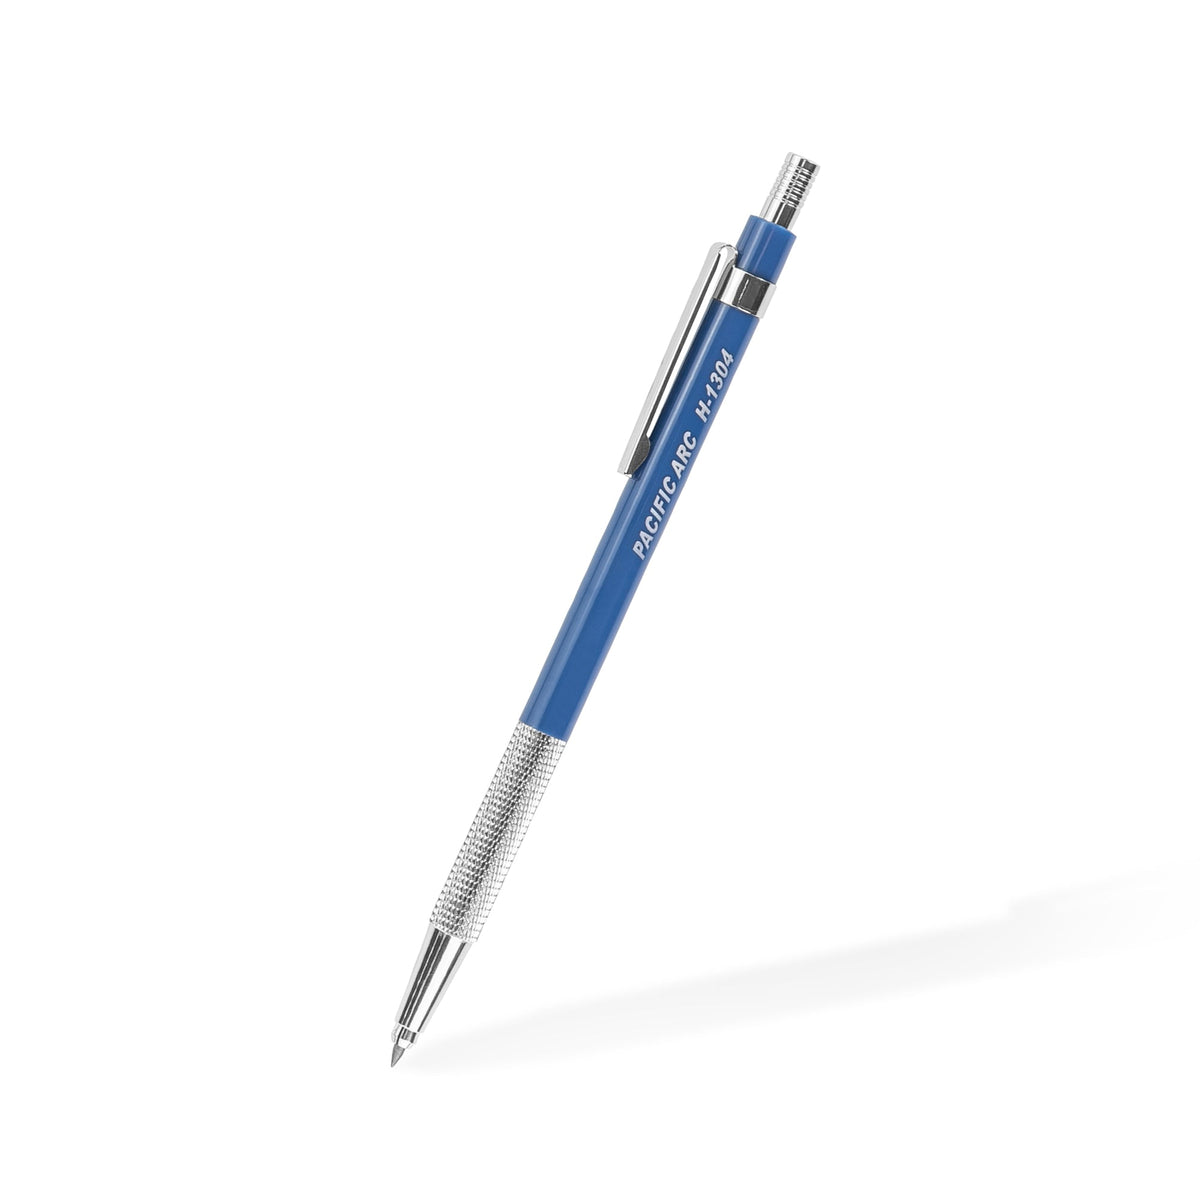 Pacific Arc, 2mm Gravity Fed Lead Holder and Lead Sharpener, Drafting Pencil for Artist Drawing, Drafting, and Sketching